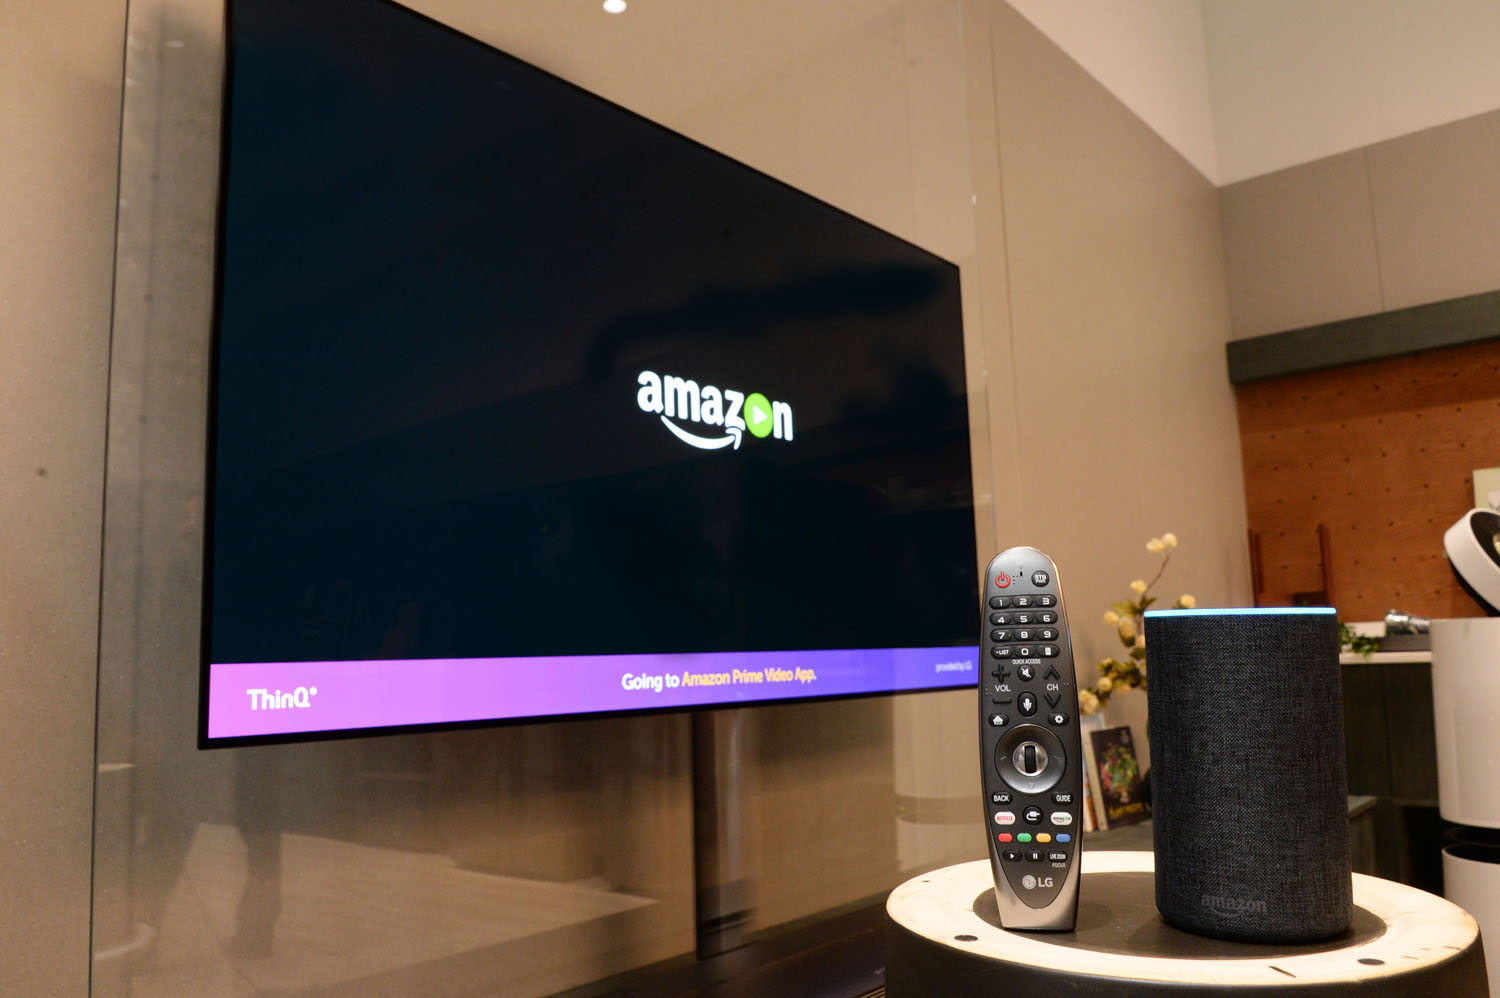 How To Sync Amazon Echo With LG Smart TV